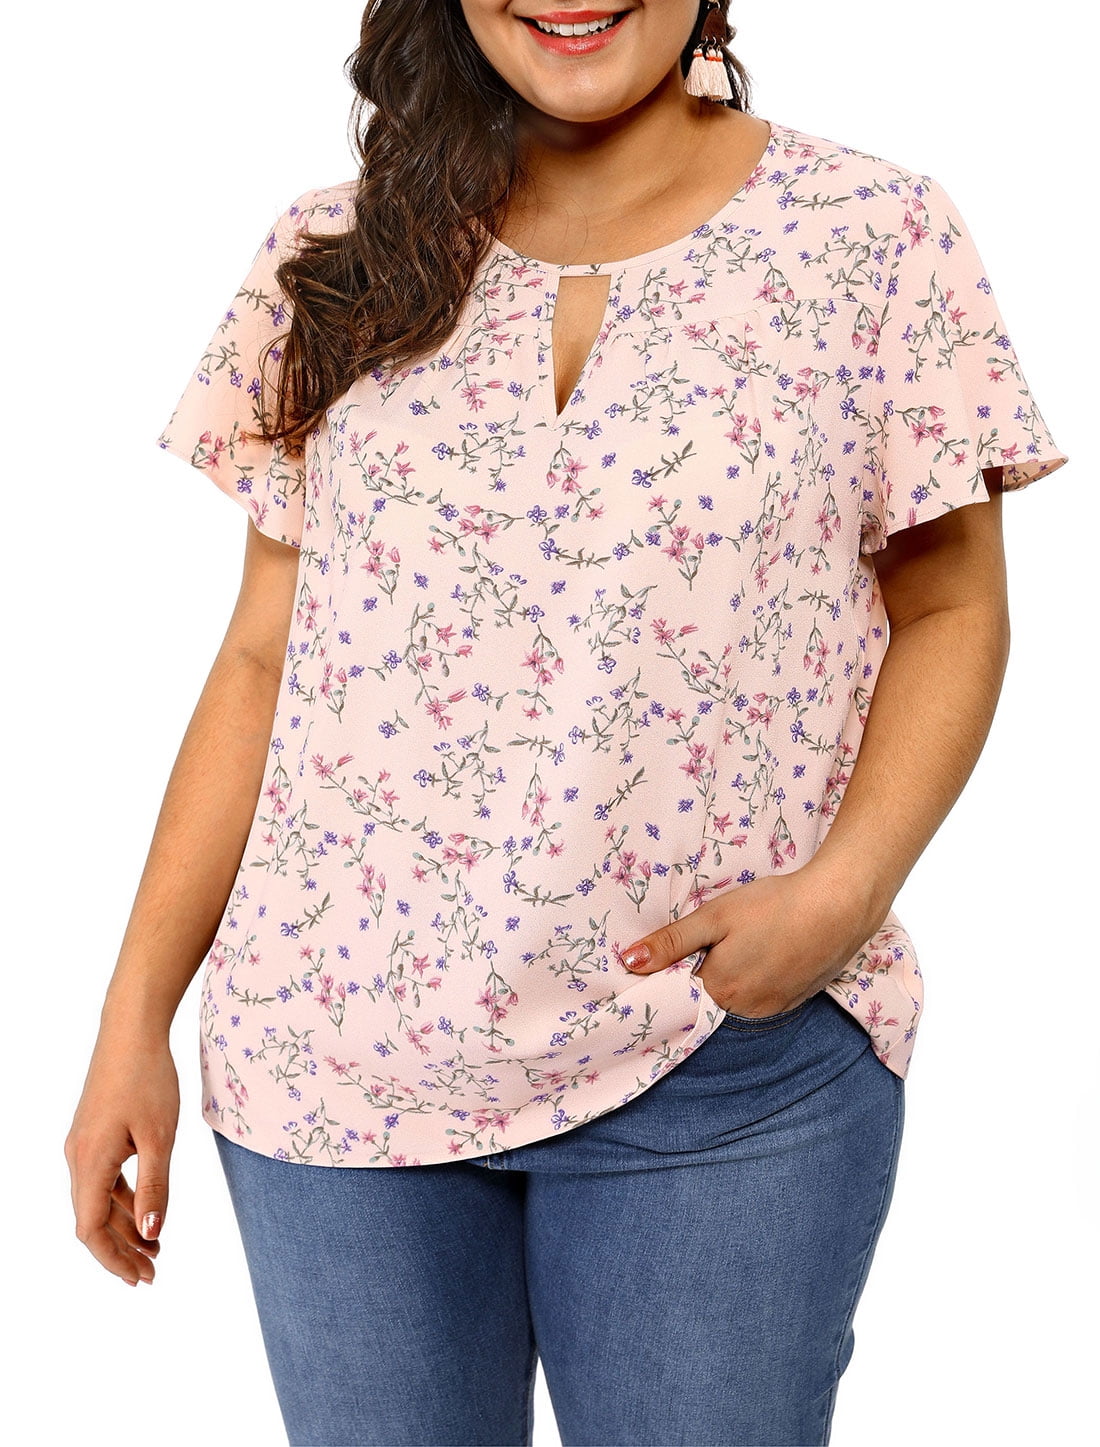 Women's Plus Size Keyhole Floral Printed Chiffon Flared Sleeve Blouse ...